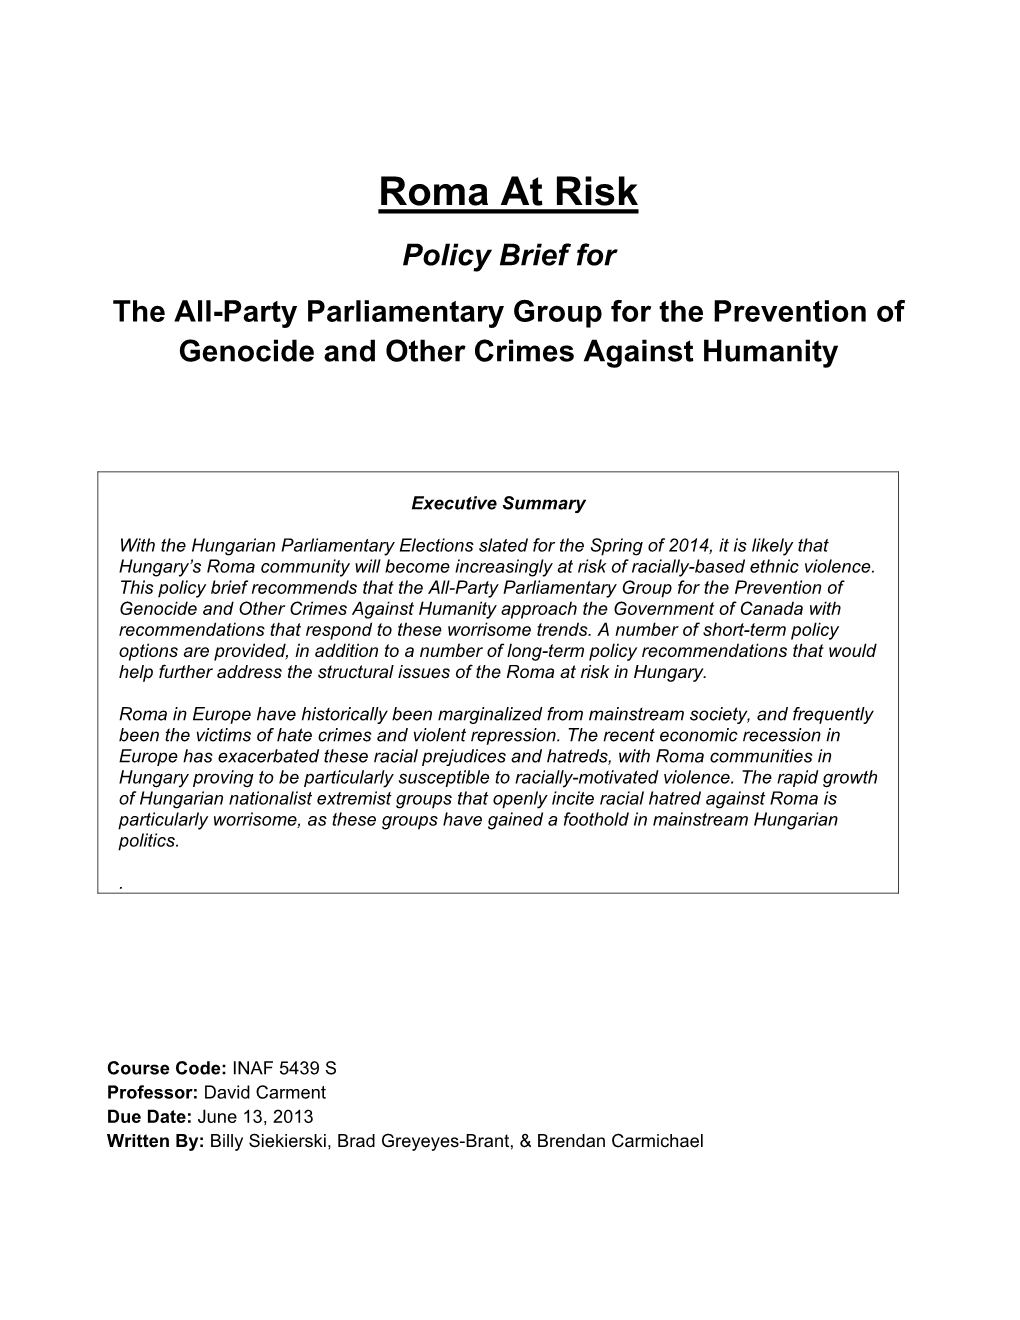 Roma at Risk Policy Brief for the All-Party Parliamentary Group for the Prevention of Genocide and Other Crimes Against Humanity